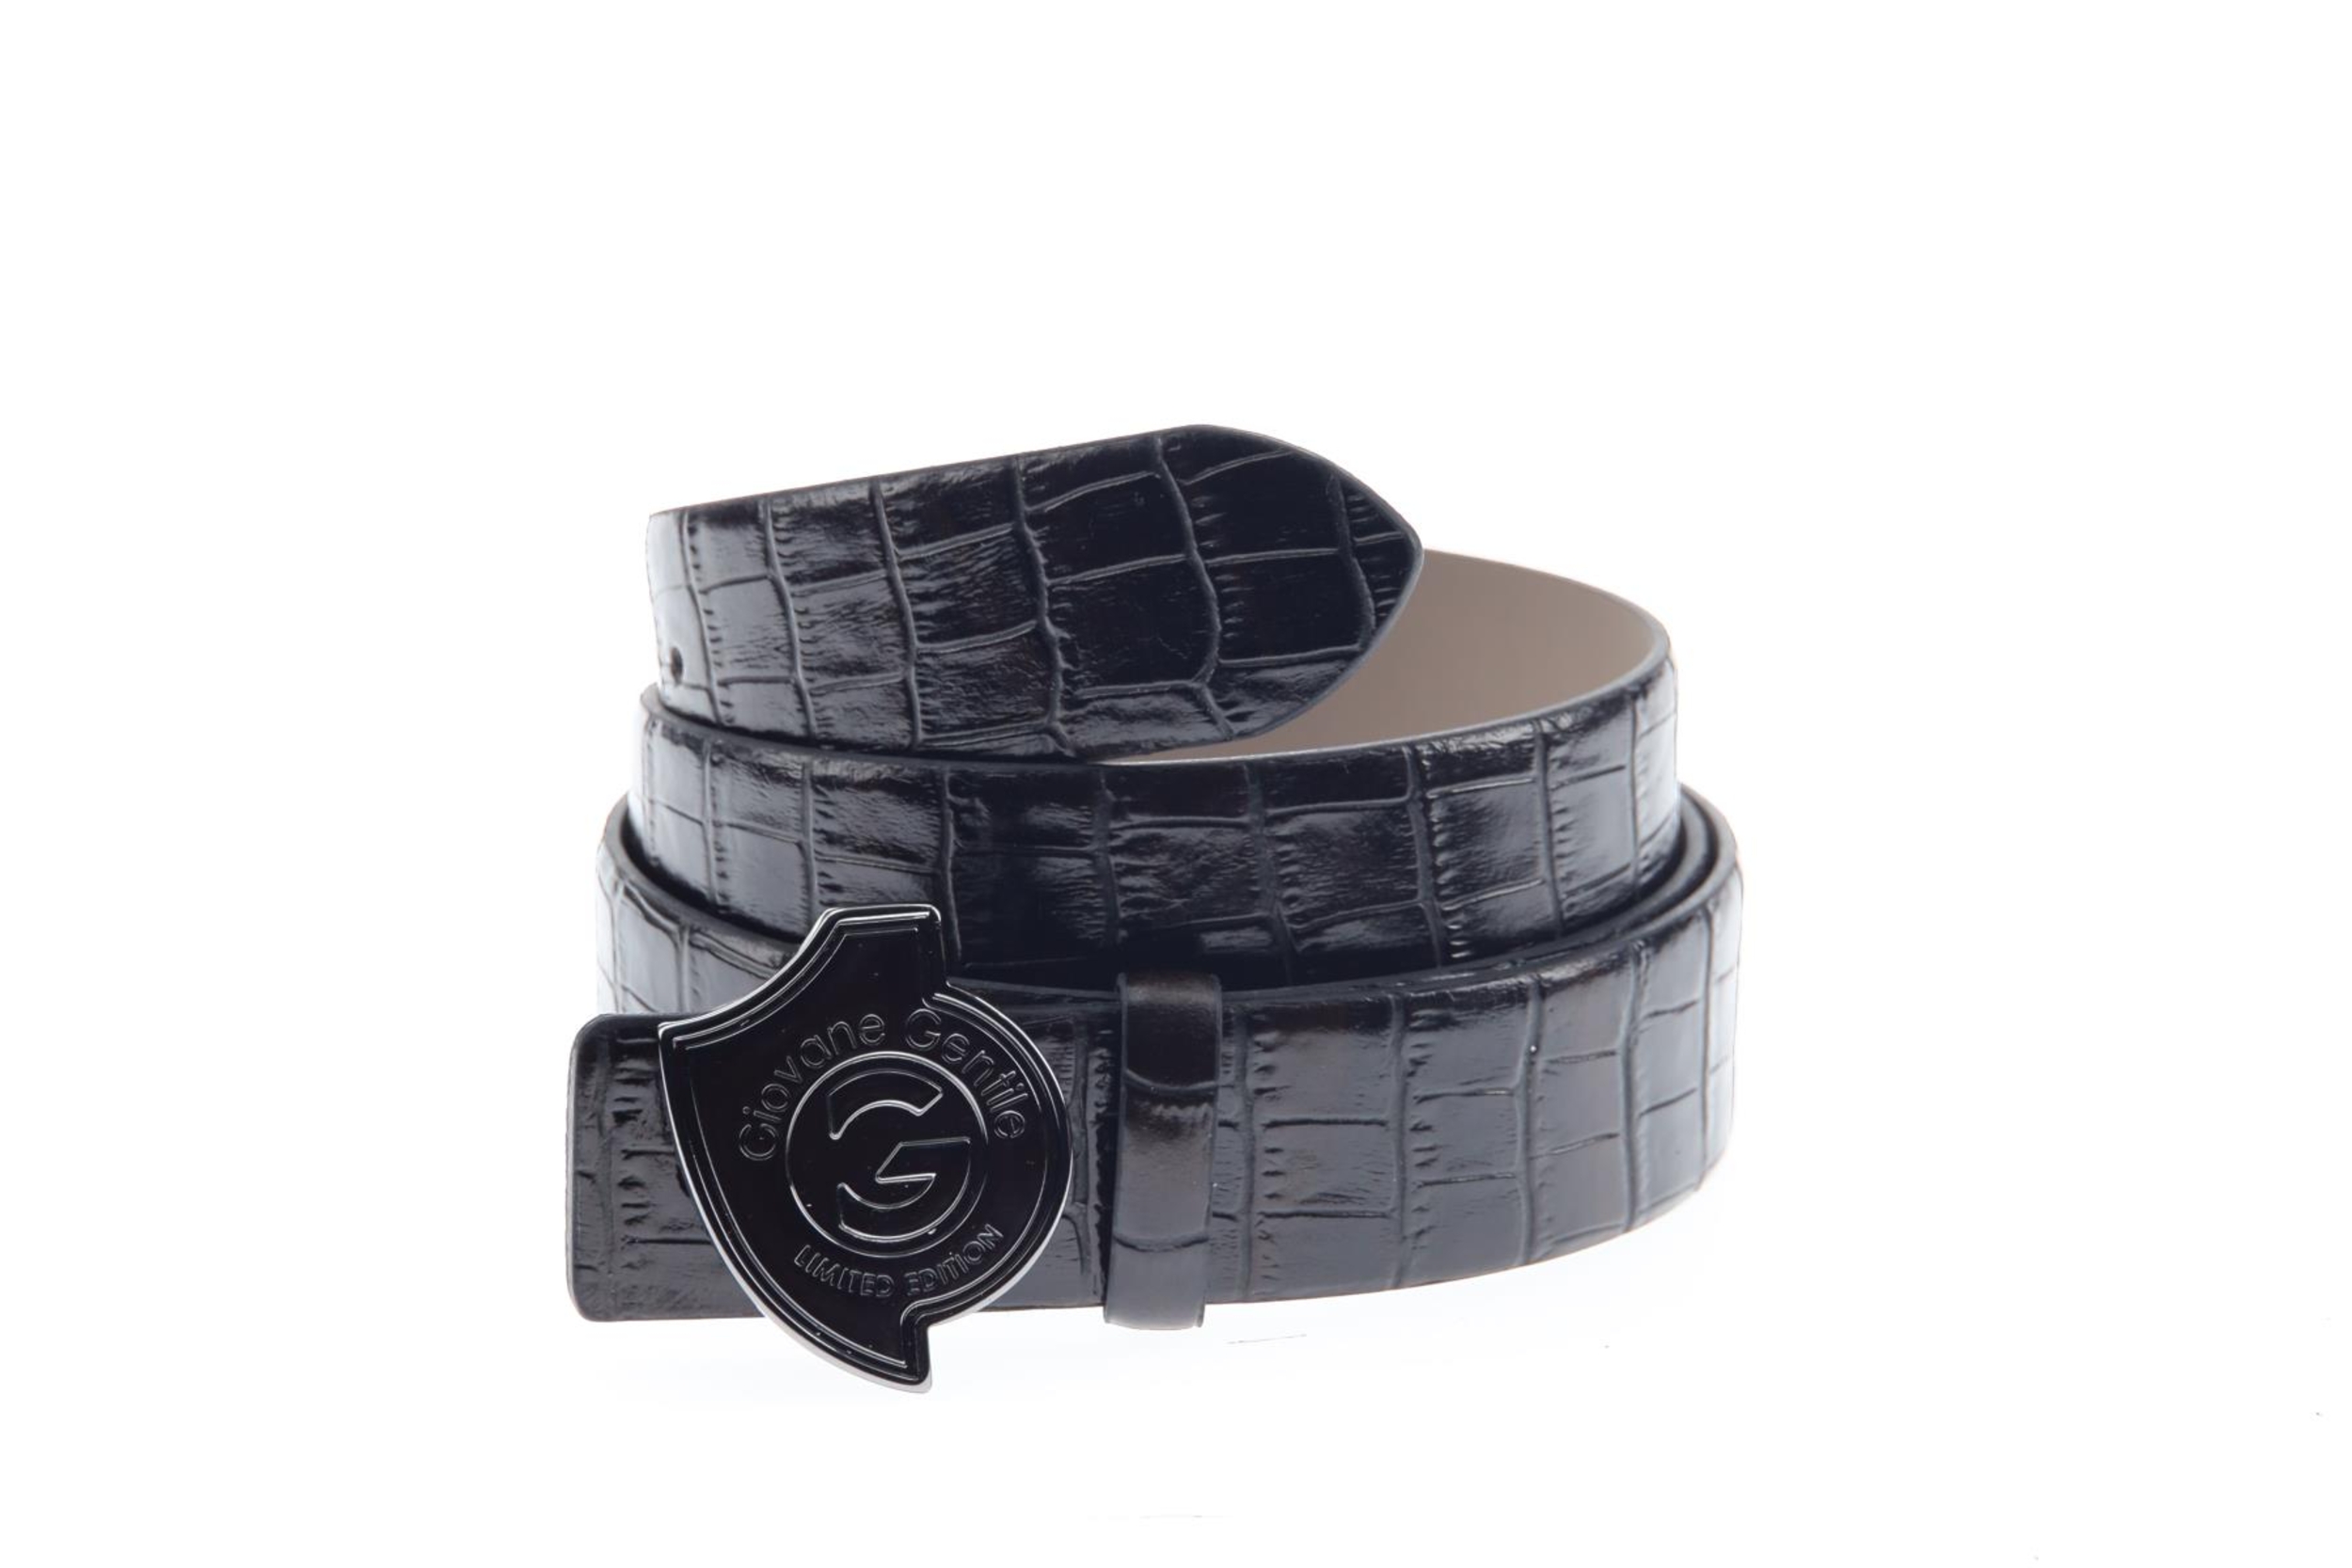 Picture of Giovane Gentile Belt